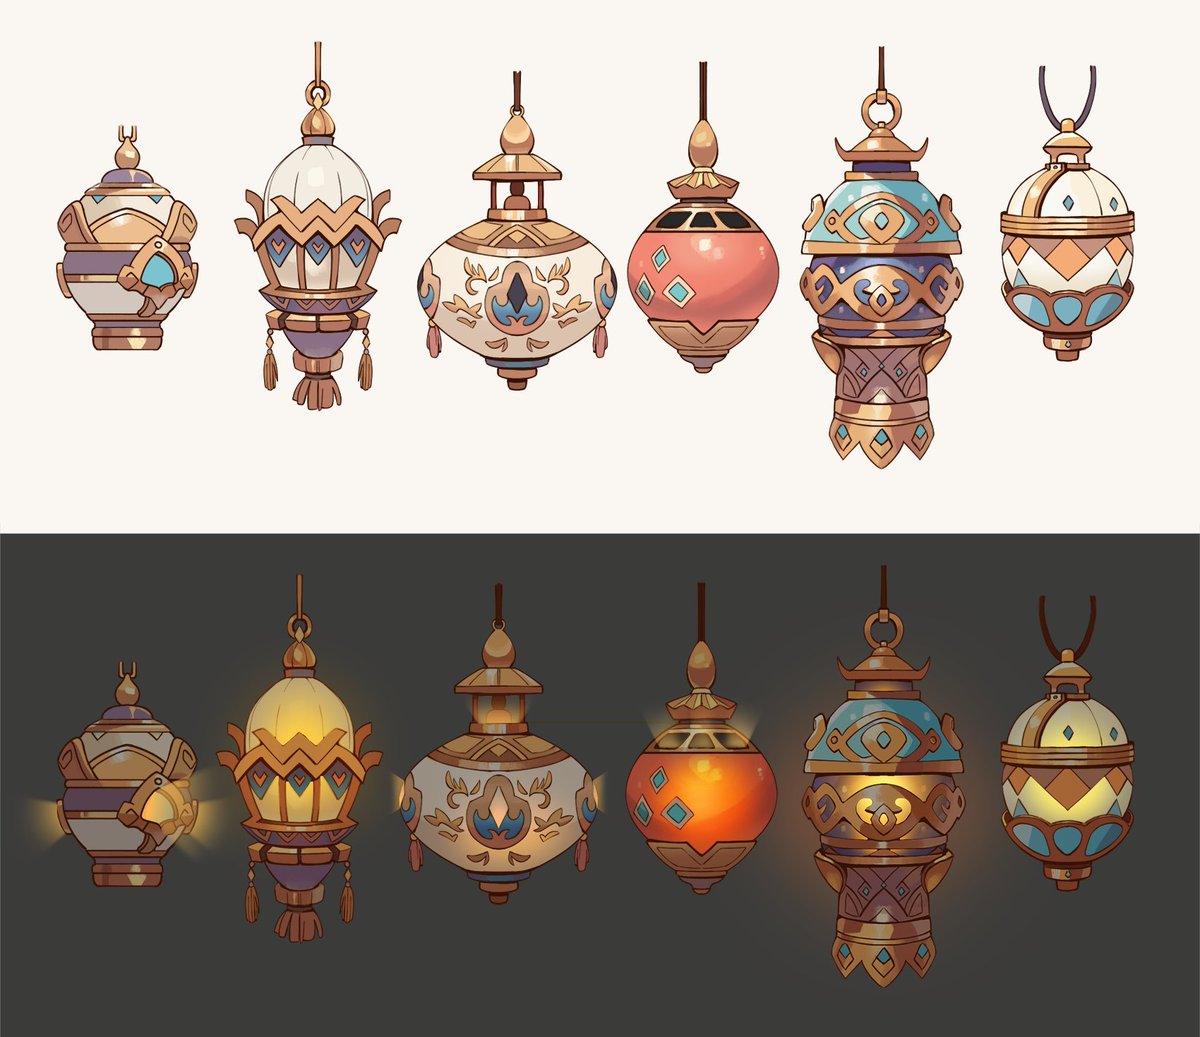 Lamp designs for my personal project✨